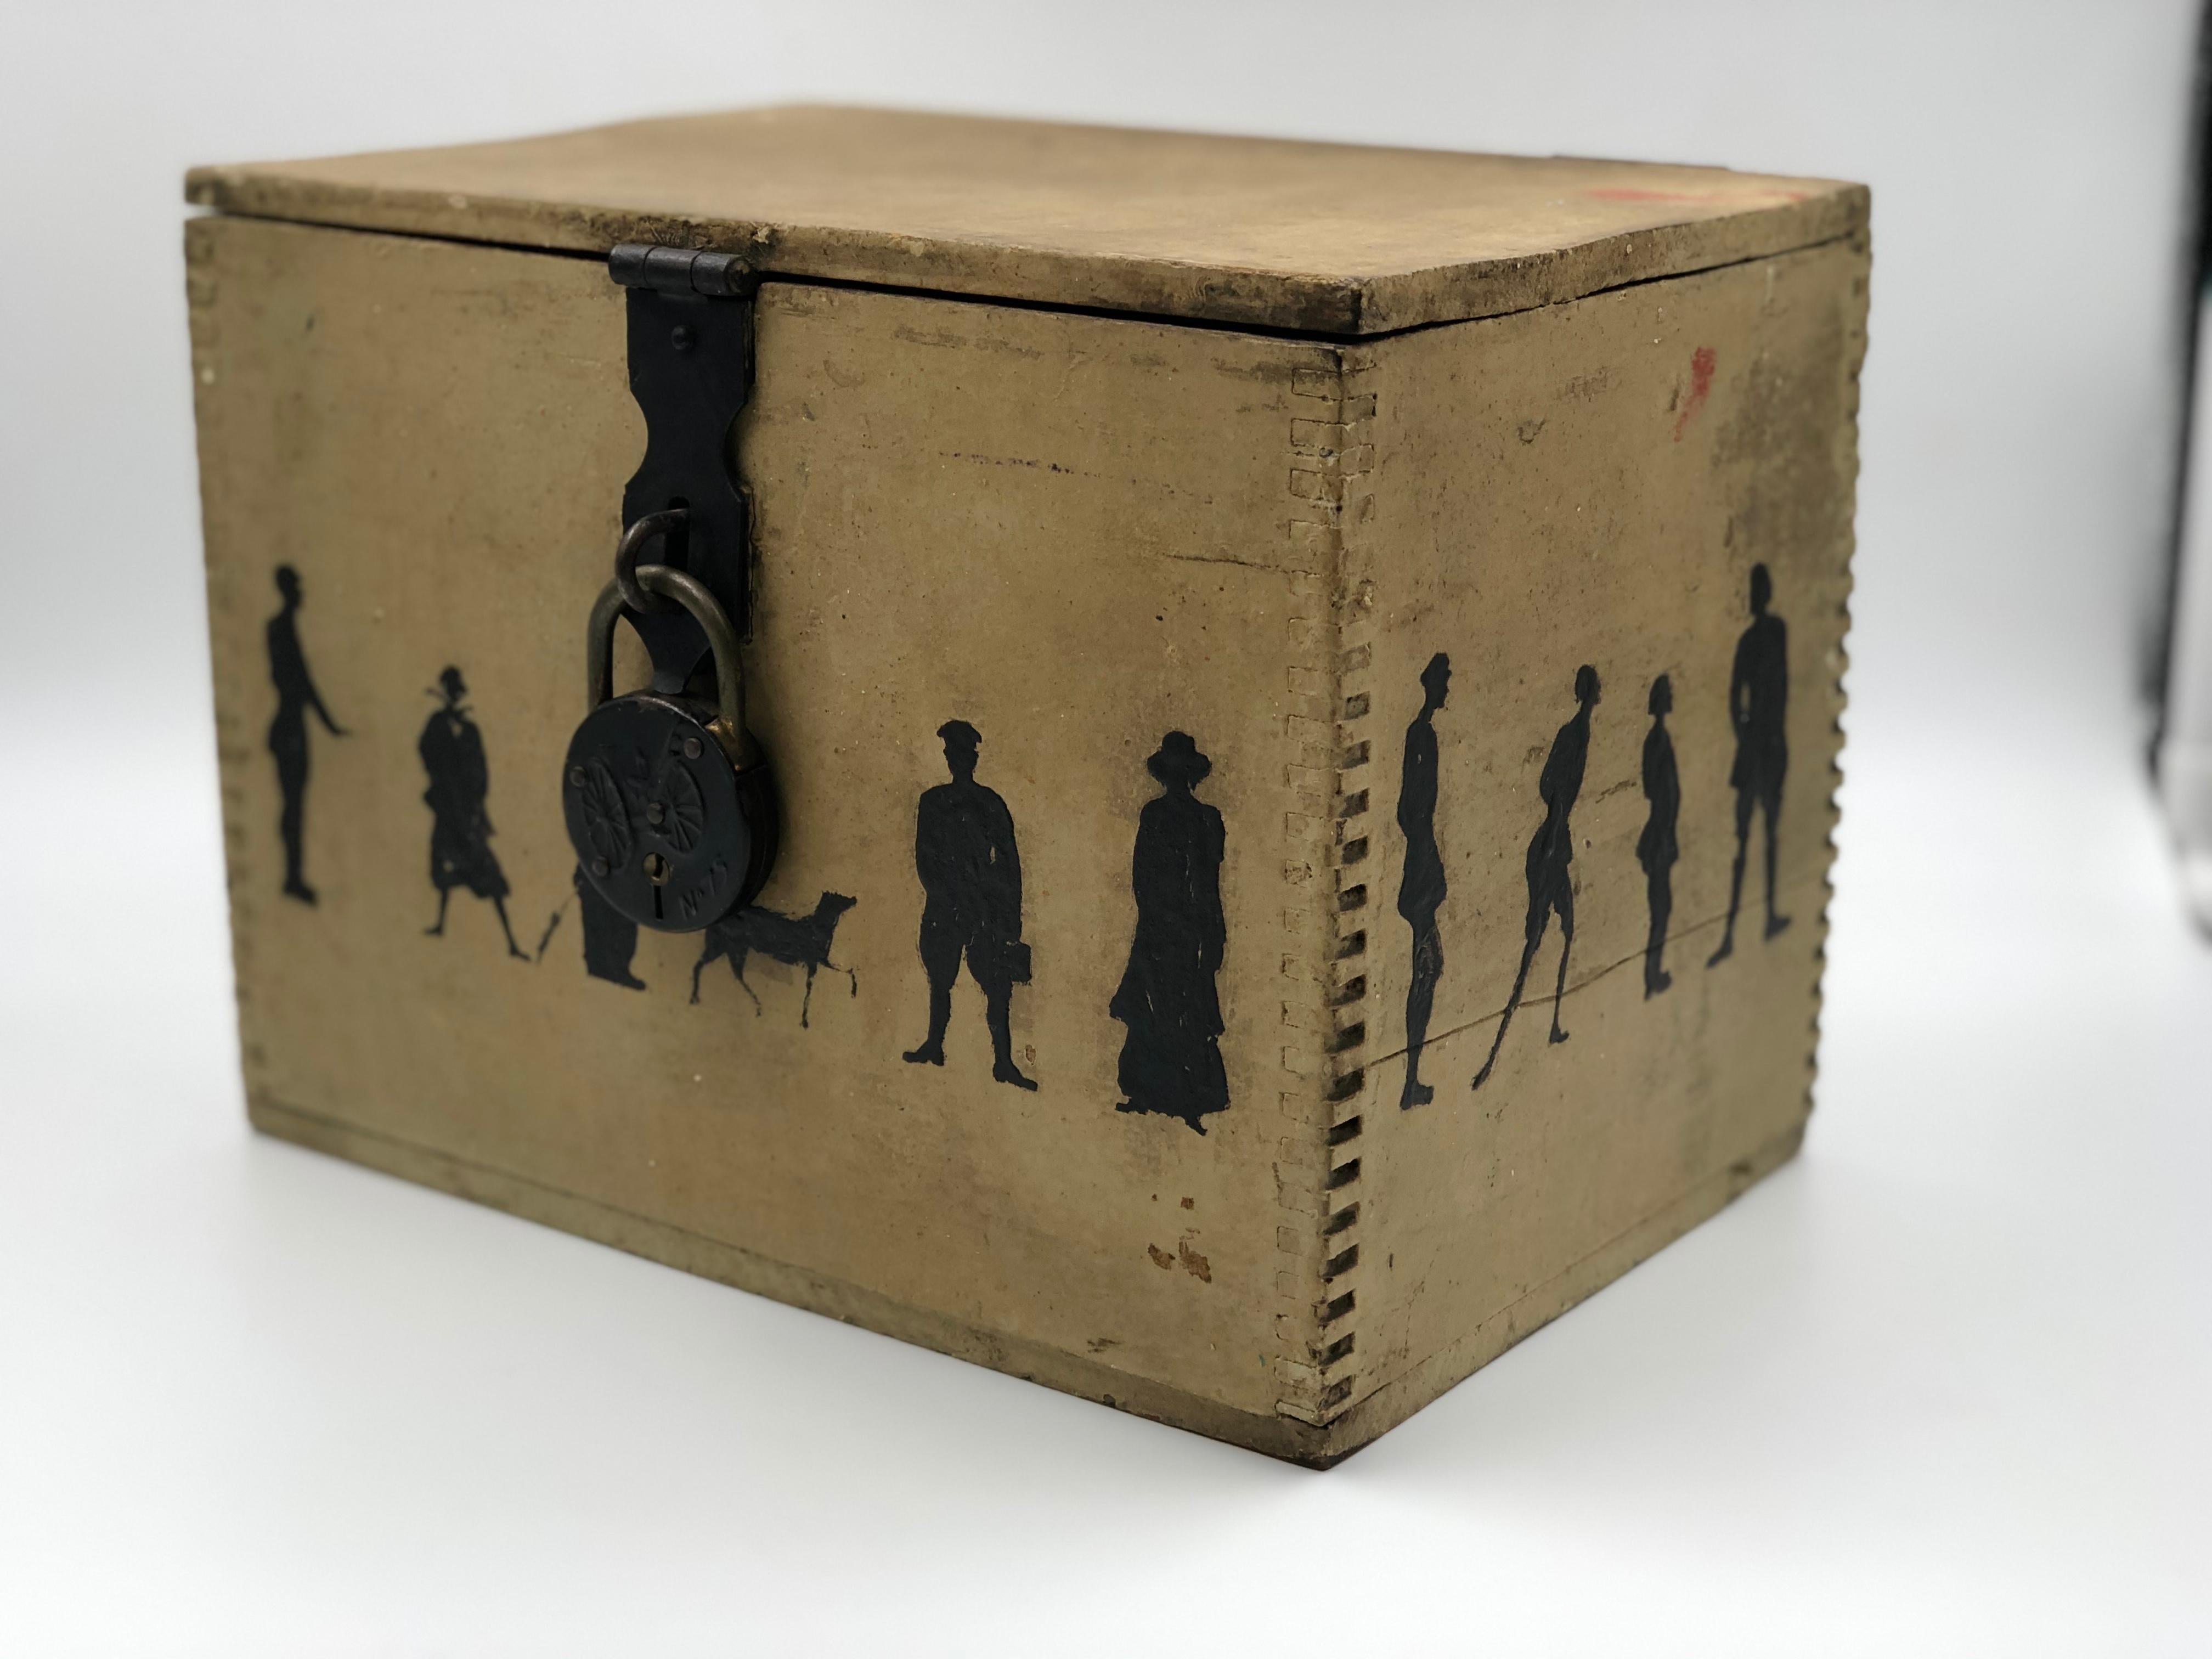 Charming late 19th century handmade decorative box with miniature dovetail corners. The box was probably originally painted cream with the color fading to tan over time. Silhouettes of ladies, gentlemen, children, a dog, and a goat are illustrated